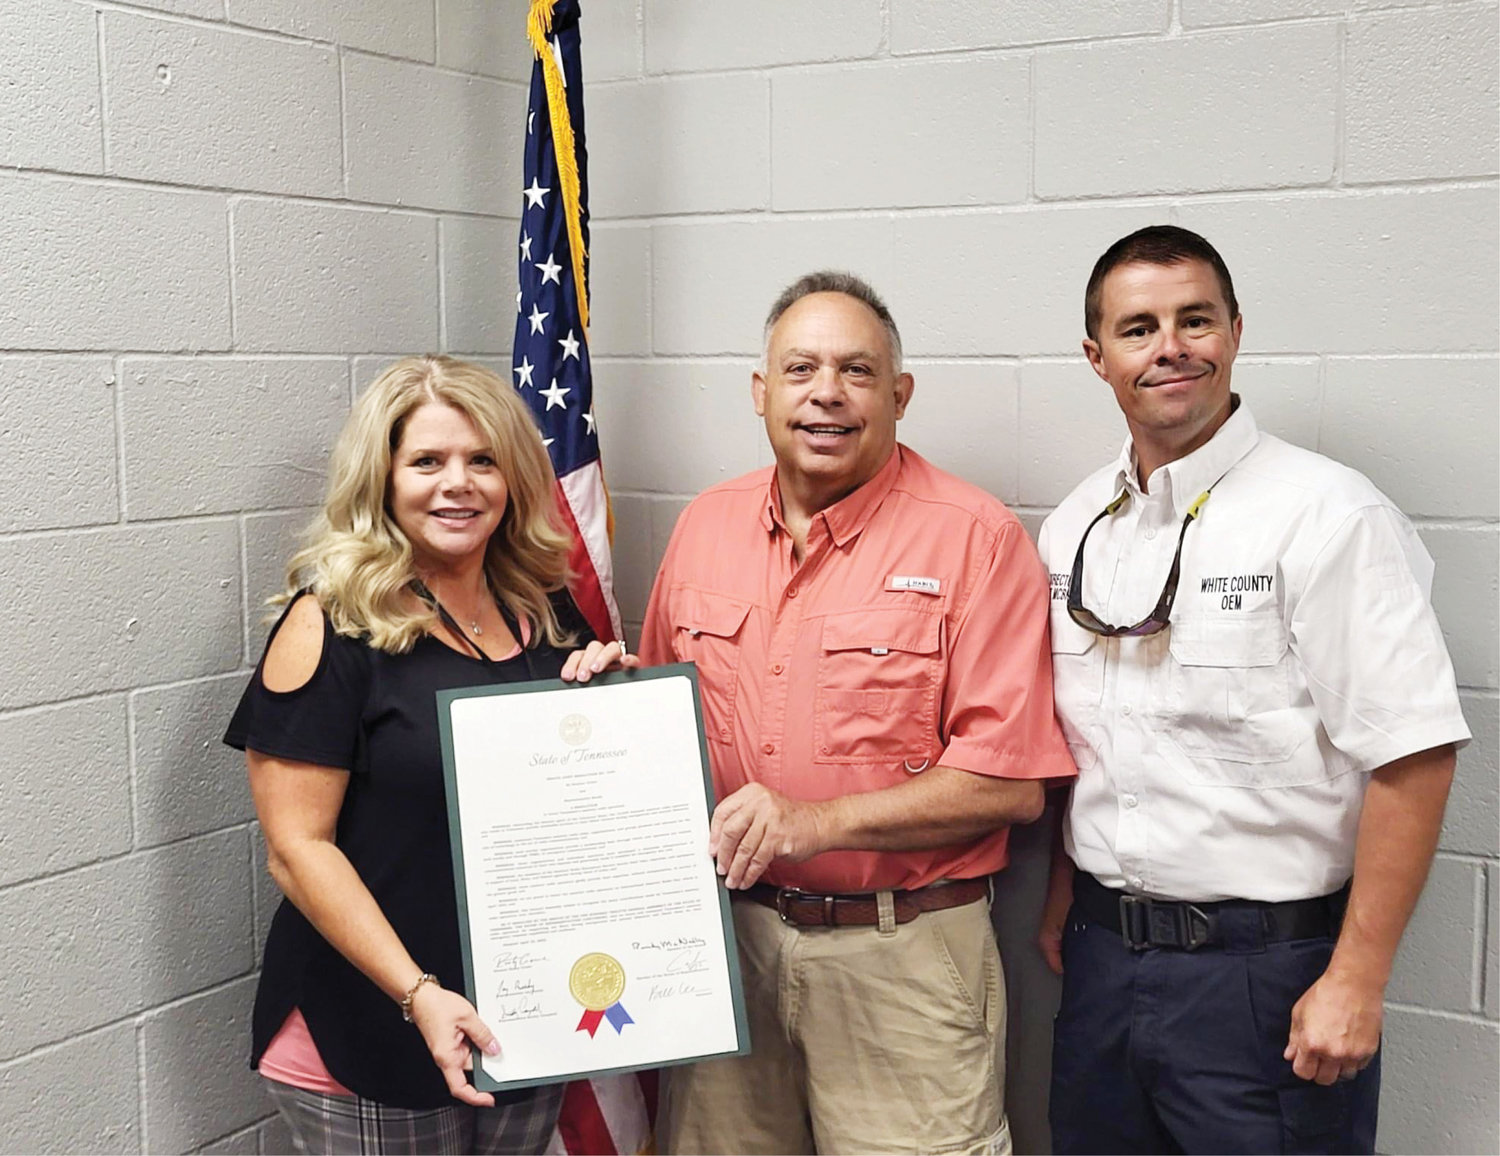 Proclamation presented to White County Amateur Radio Operators | Sparta Live